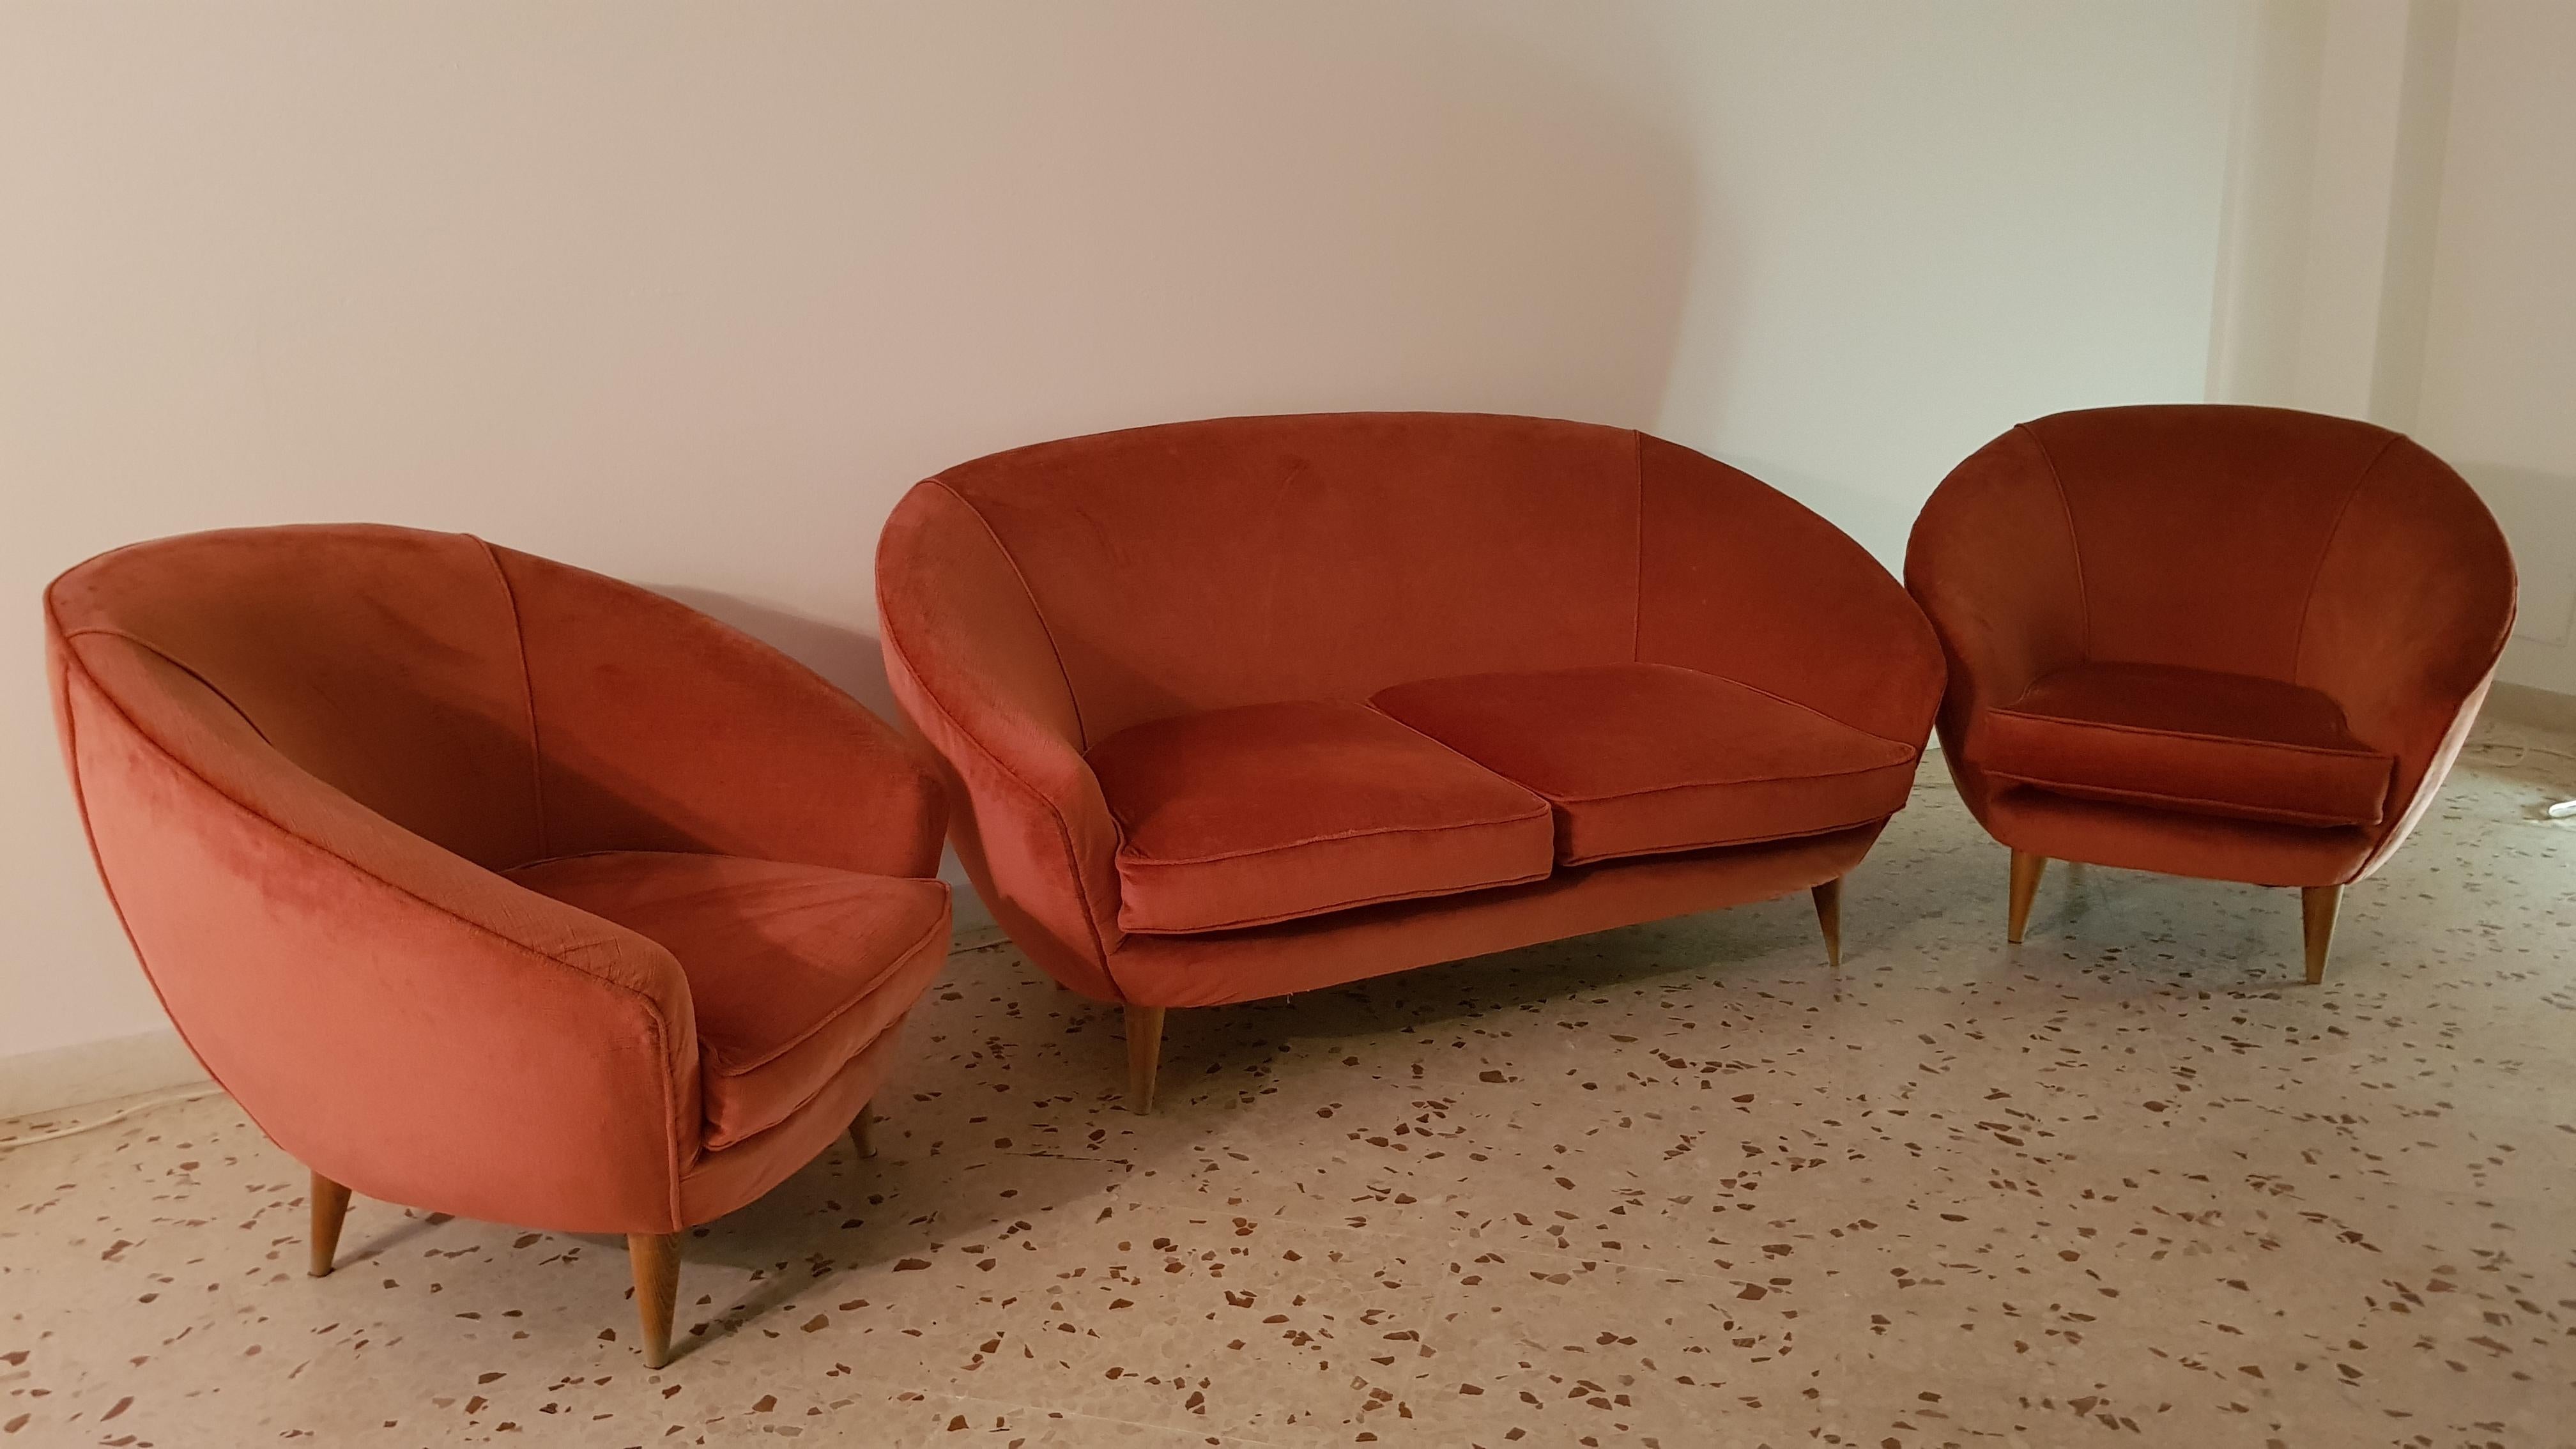 Beautiful set of 3 curved velvet sofà and 2 armchairs Giò Ponti, in coral color with a wood legs, 1950s.